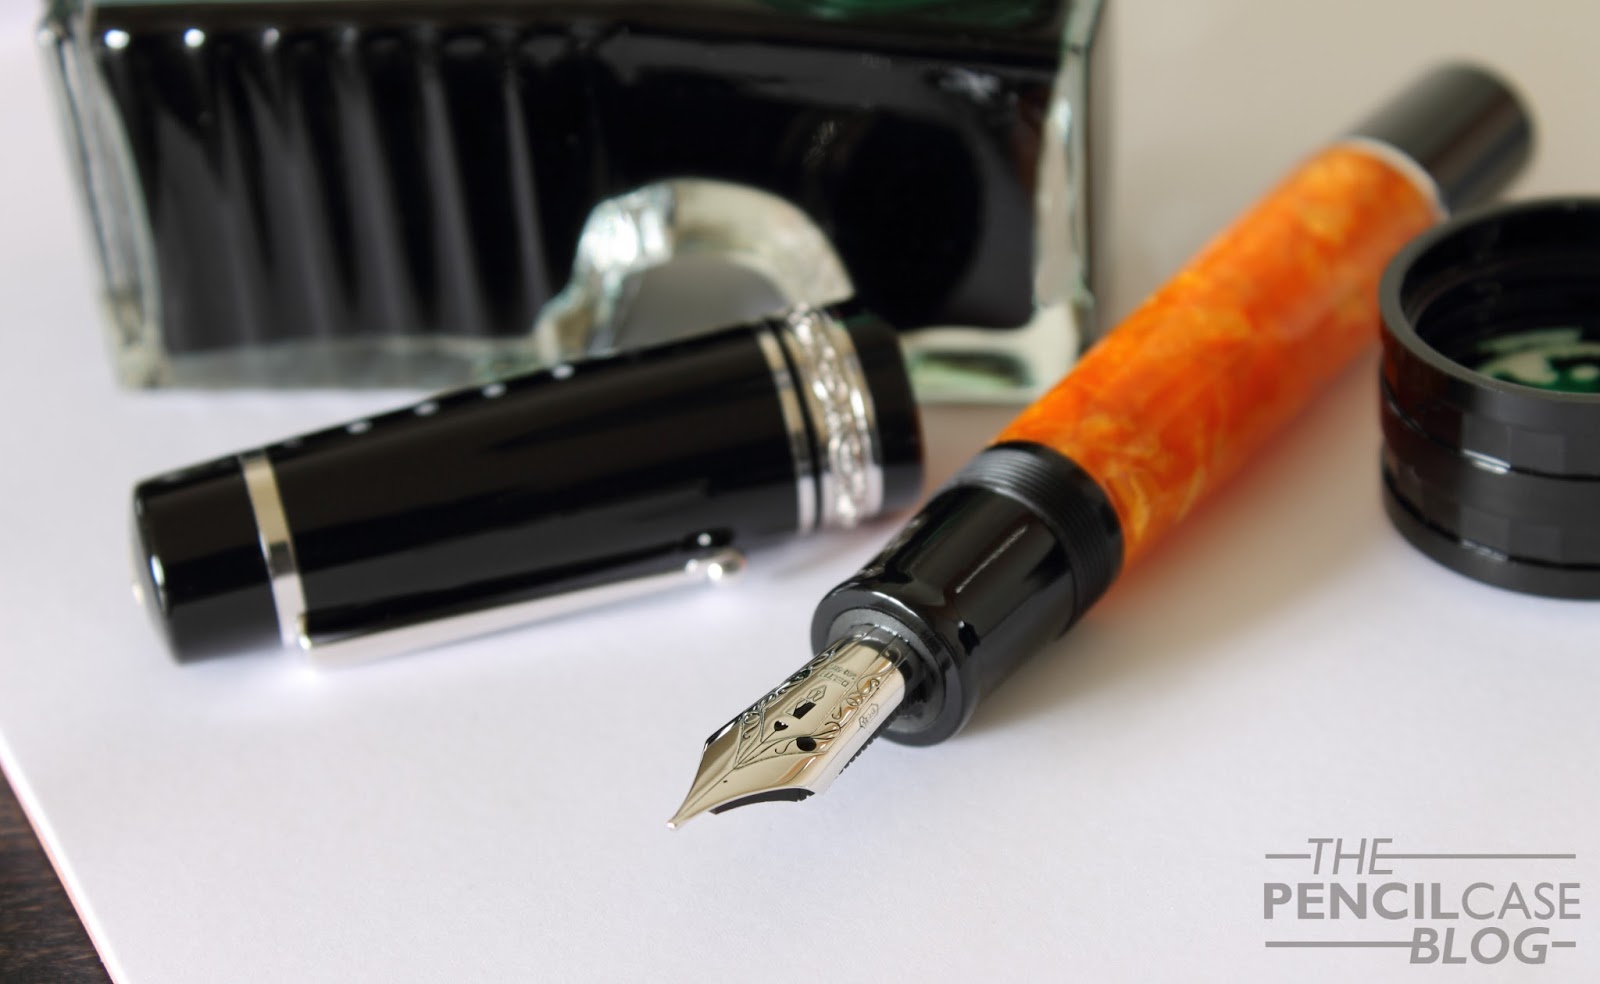 DELTA OVERSIZE REVIEW The Pencilcase Blog | Fountain pen, Pencil, Ink and Paper reviews